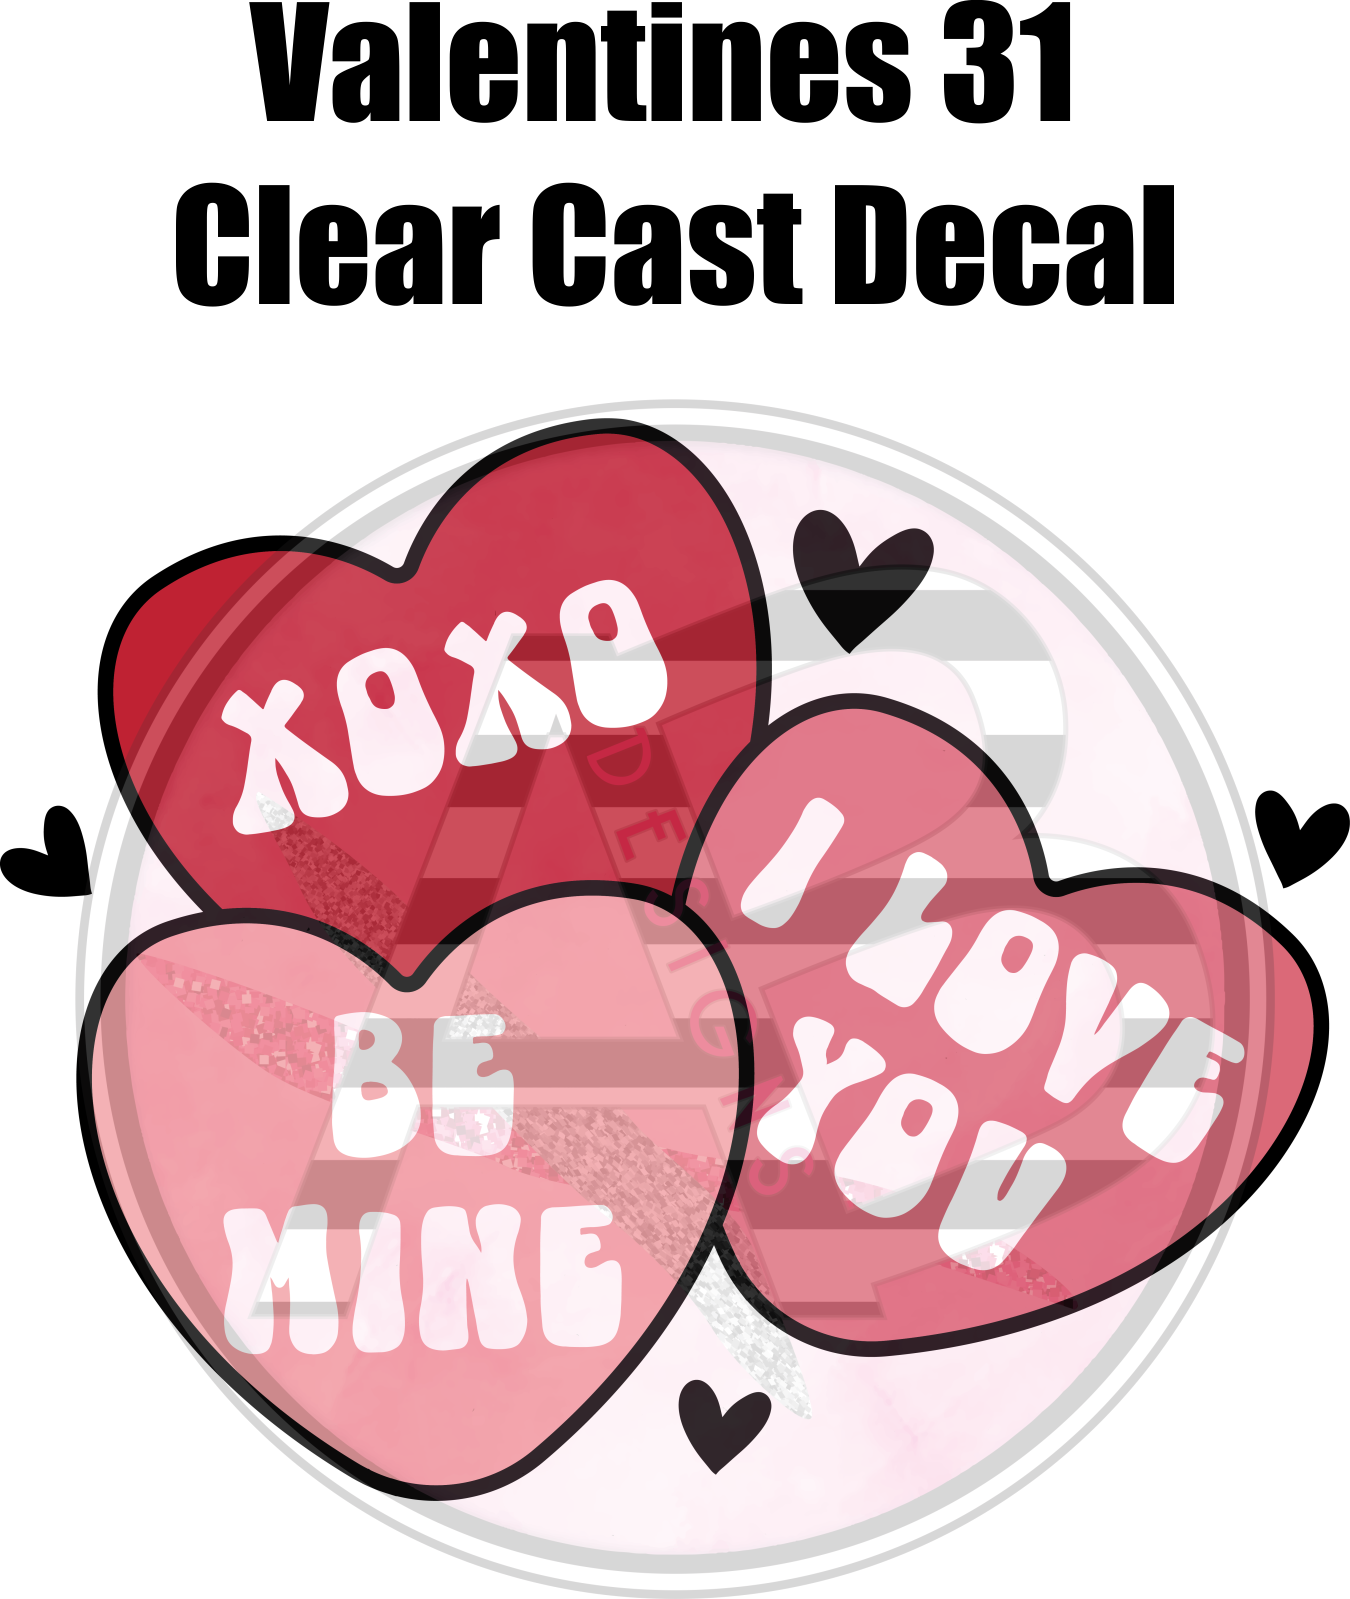 Valentines 31 - Clear Cast Decal